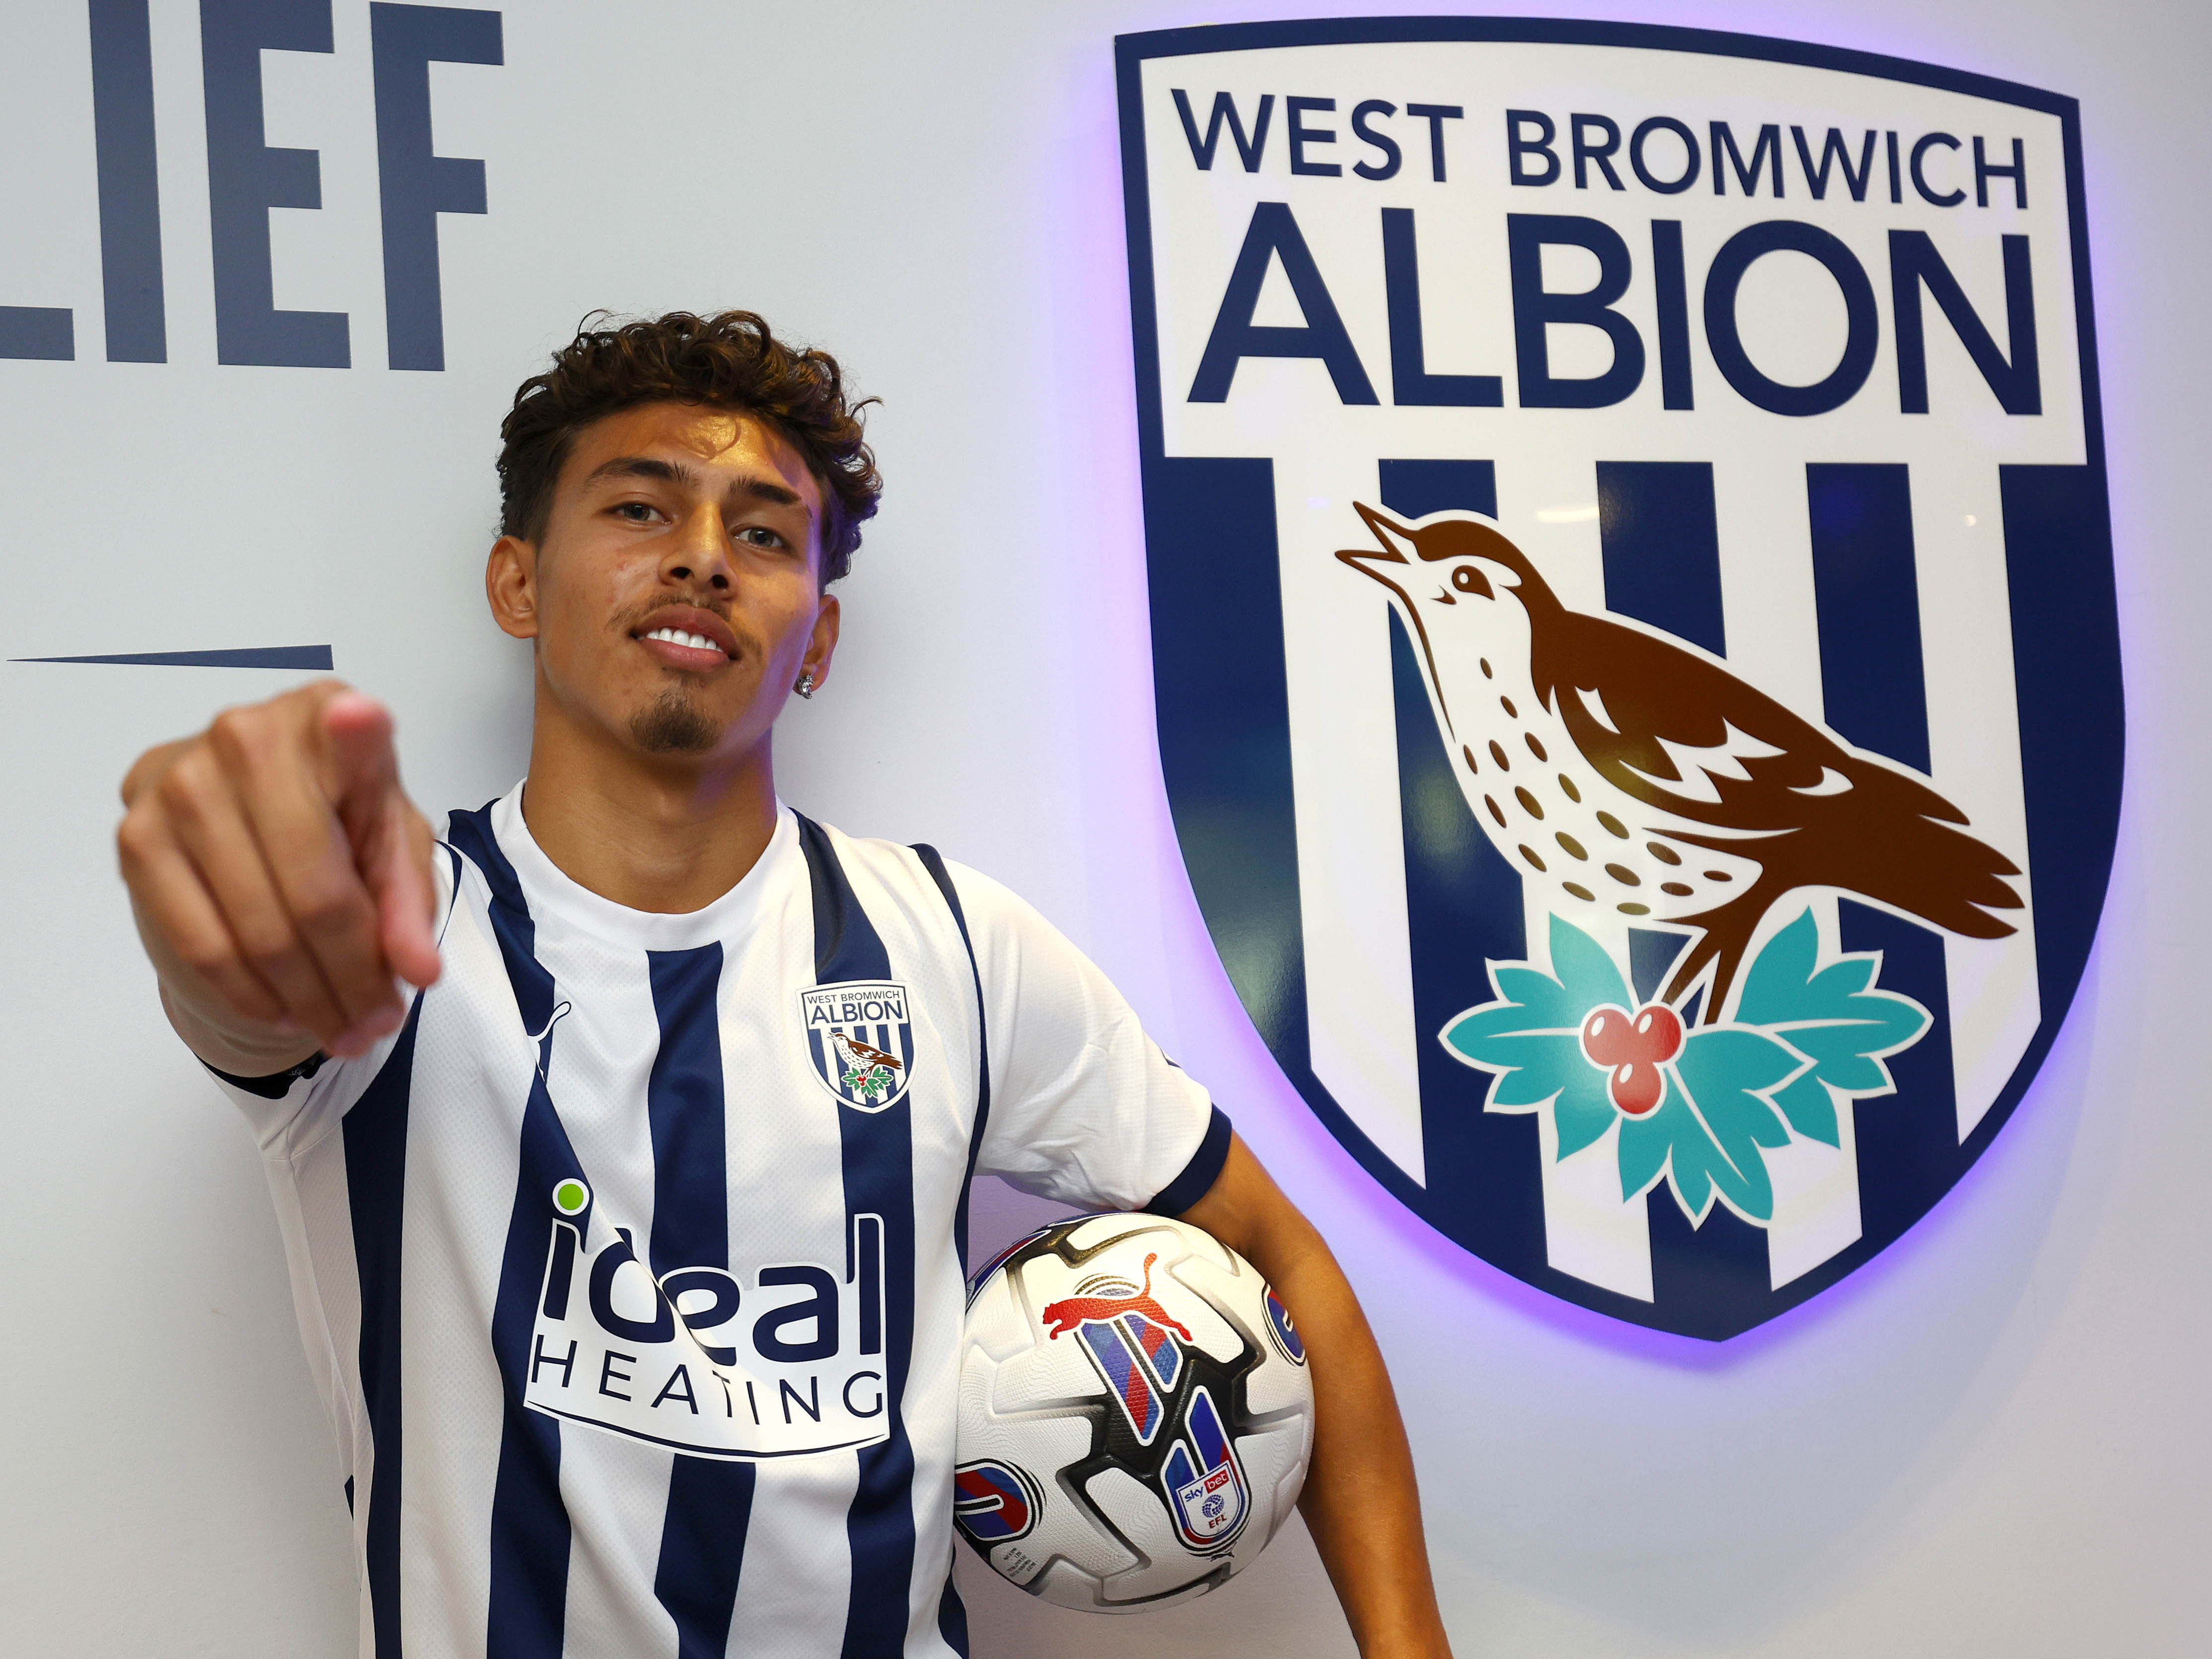 Jeremy Sarmiento next to a WBA badge pointing at the camera holding a football